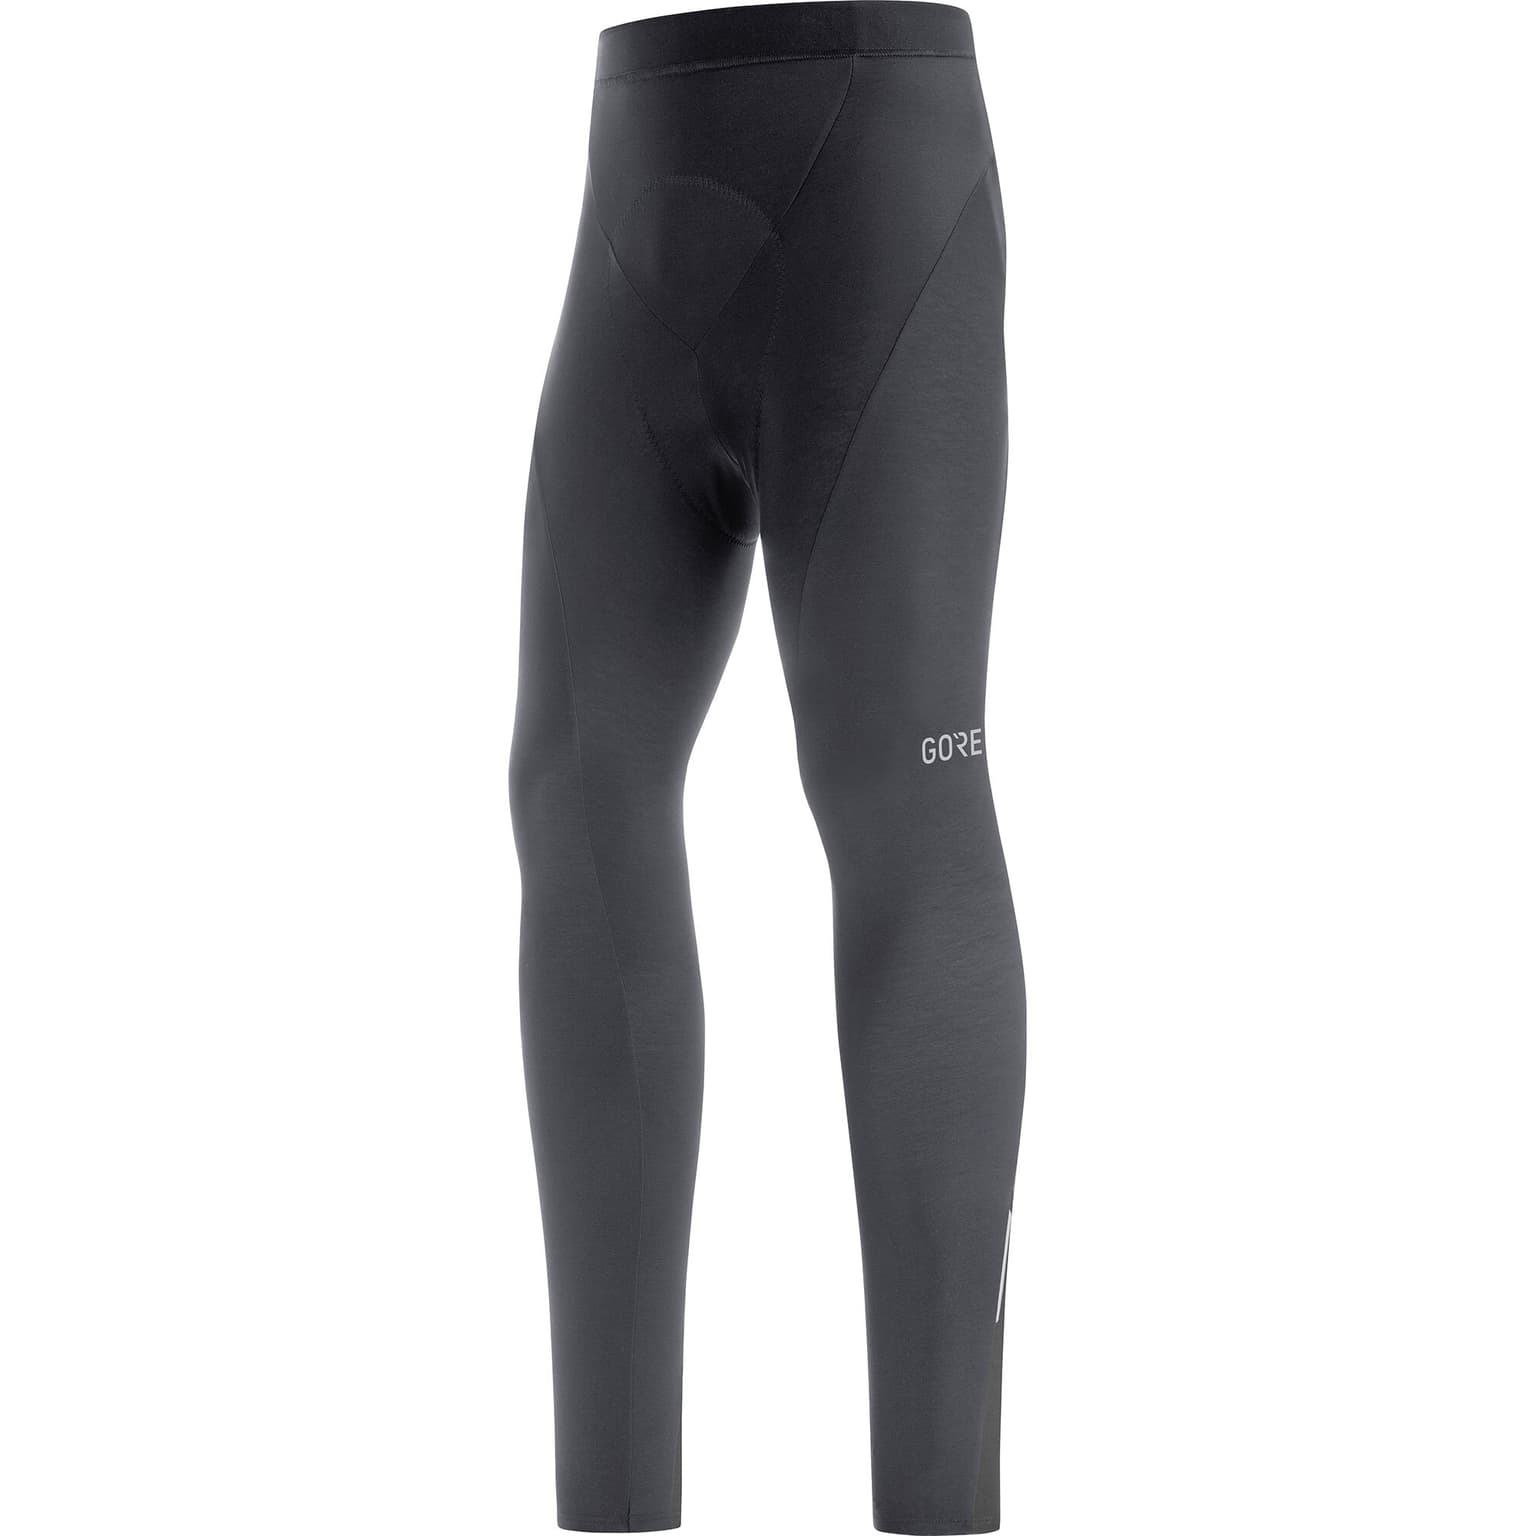 Gore Gore C3 Thermo Tights+ Tights noir 1